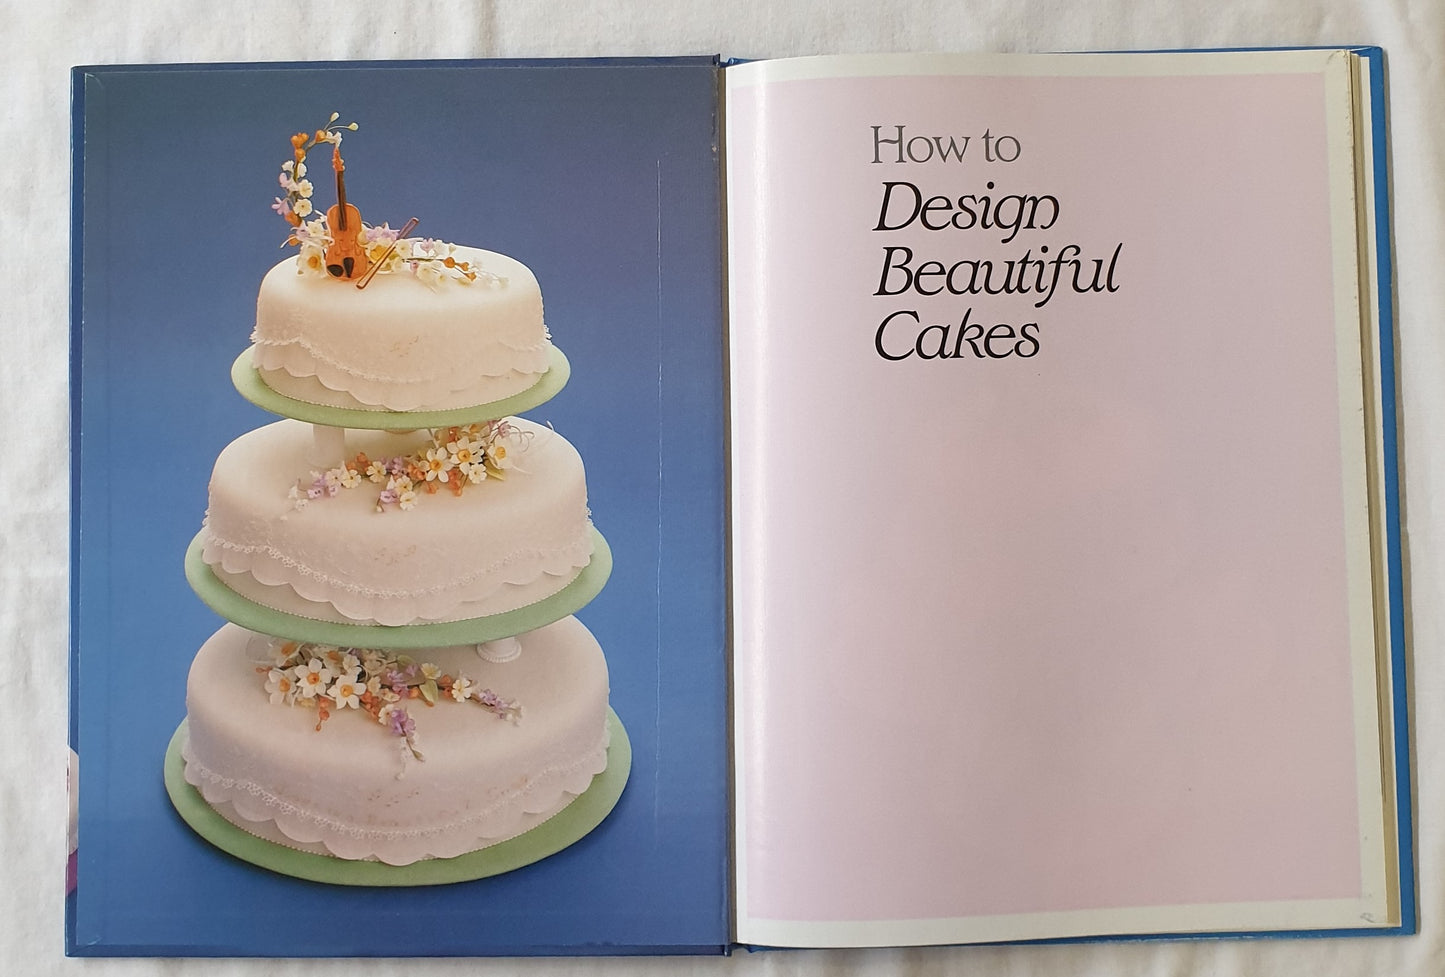 How to Design Beautiful Cakes by Elaine A. Daveson